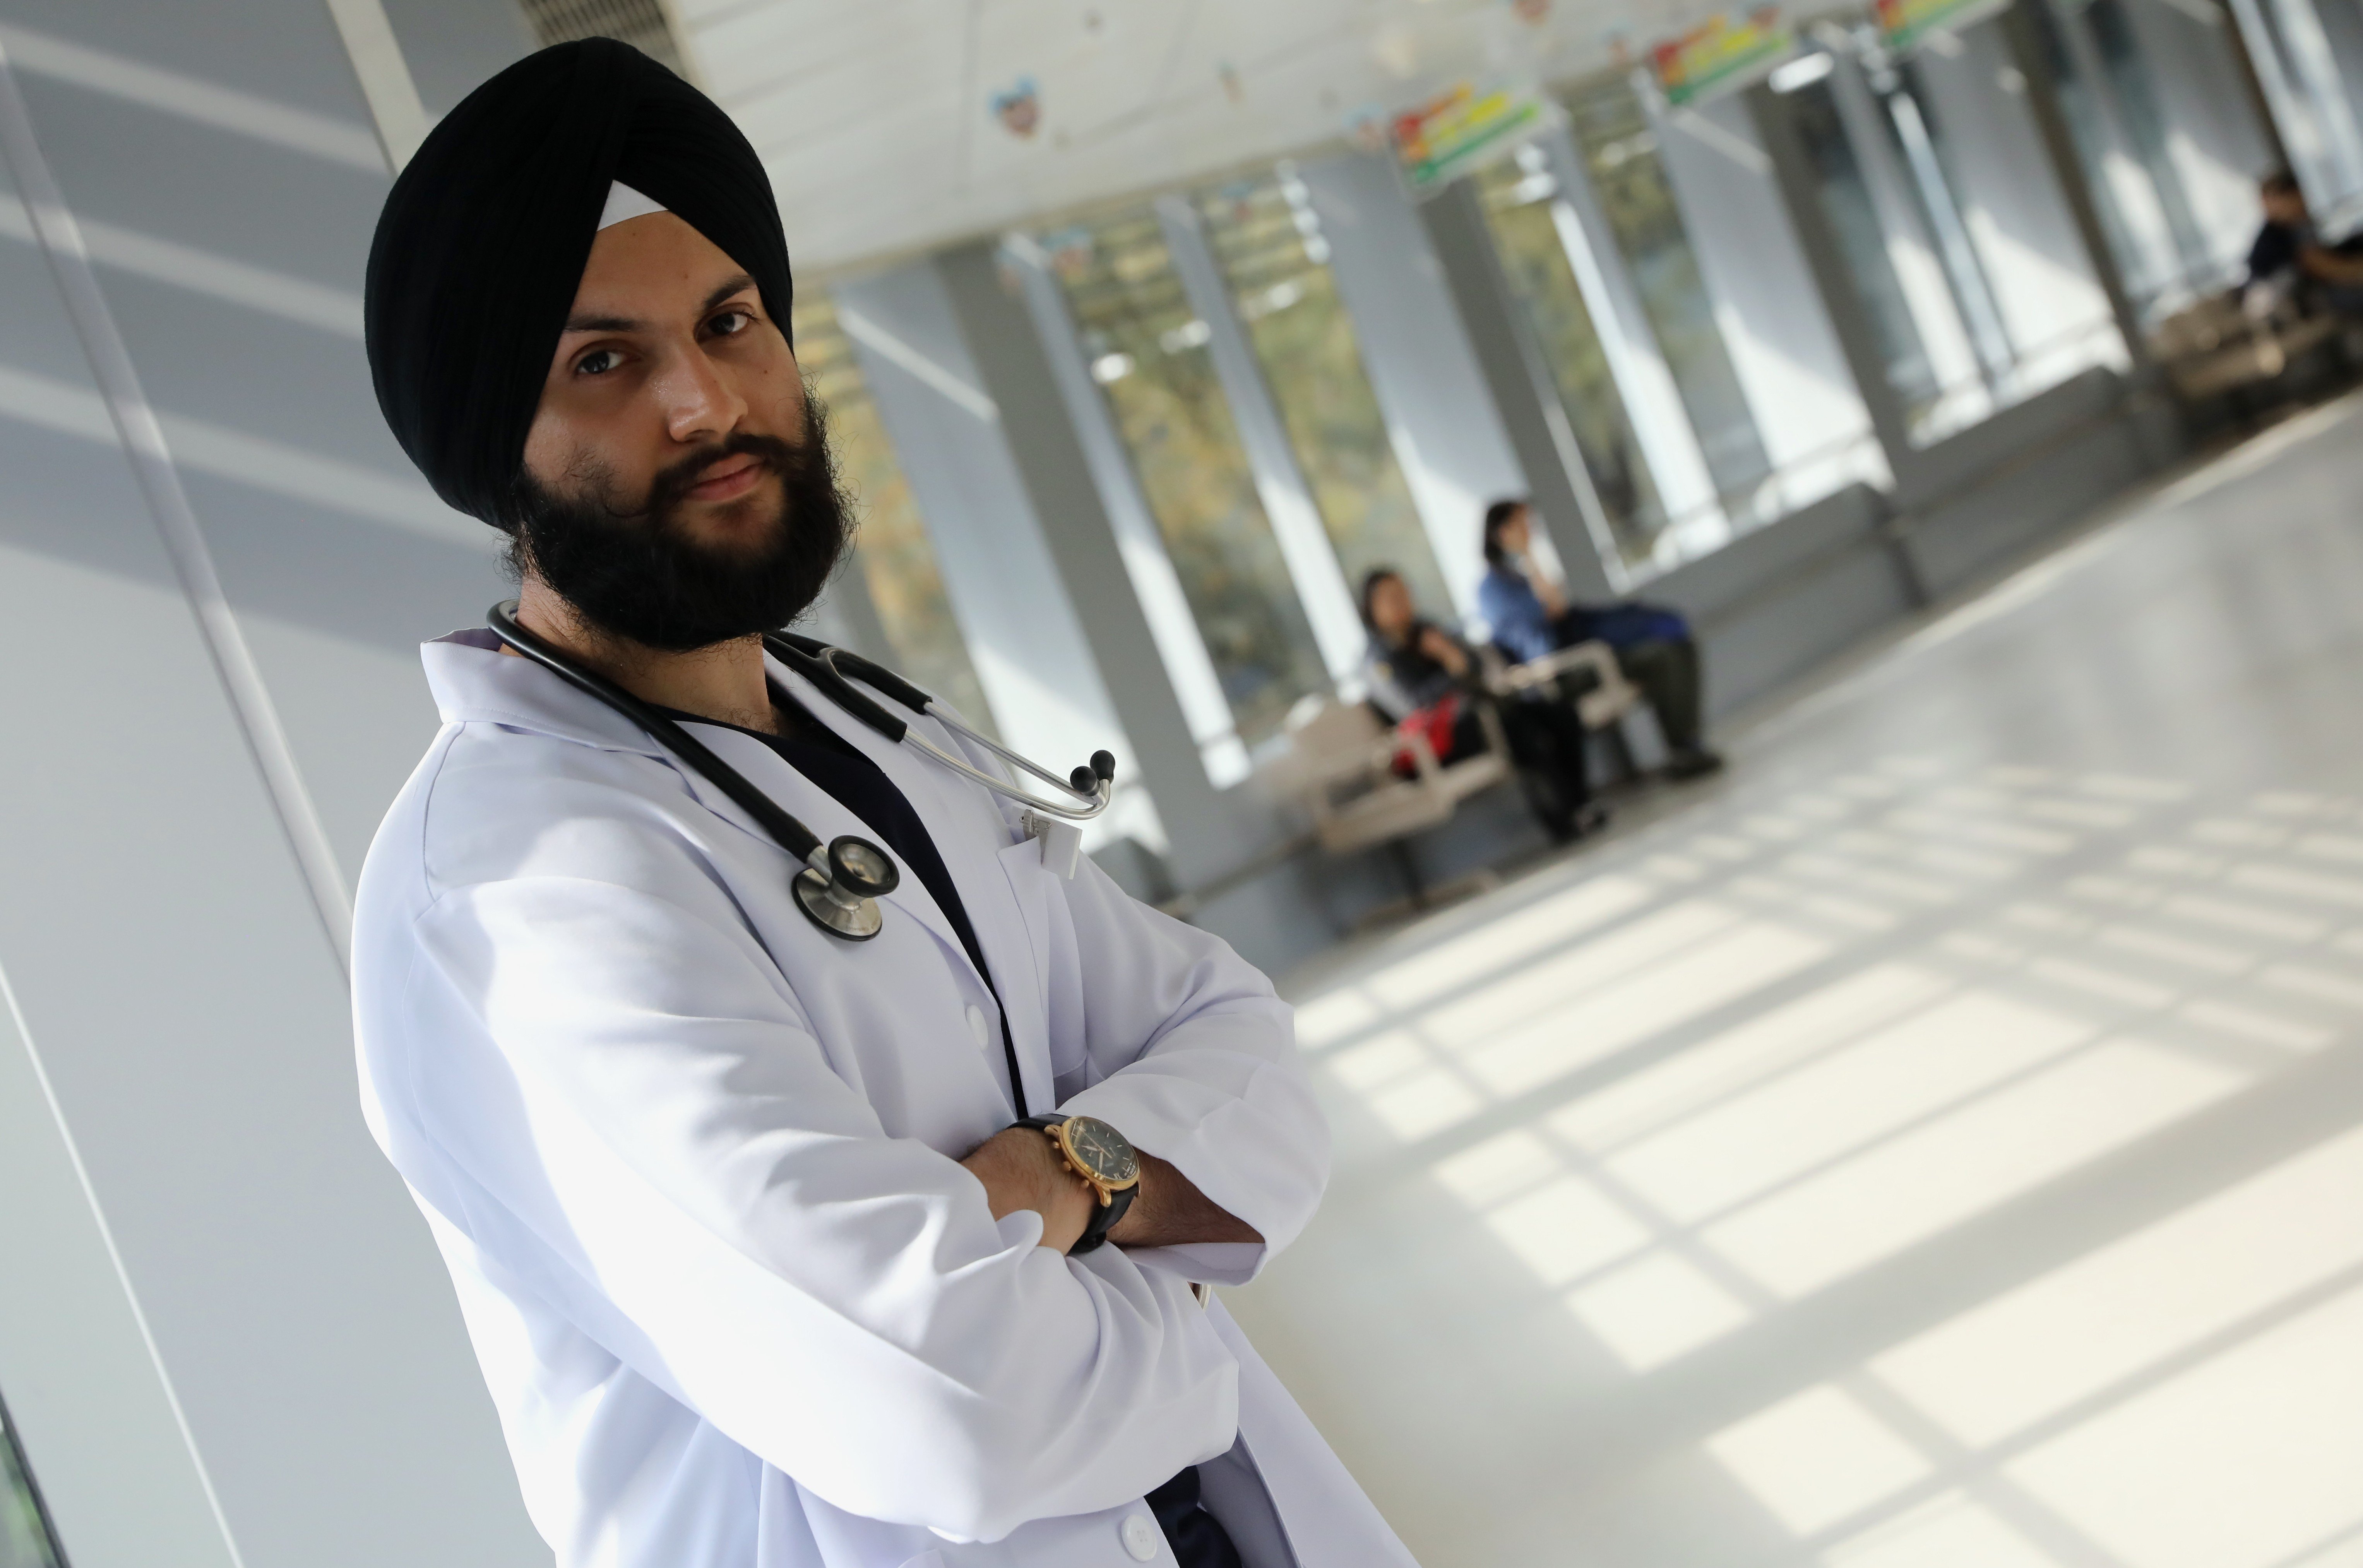 Sukhdeep Singh, a Sikh medical student, hopes to smash stereotypes at work and in society. Photo: K. Y. Cheng